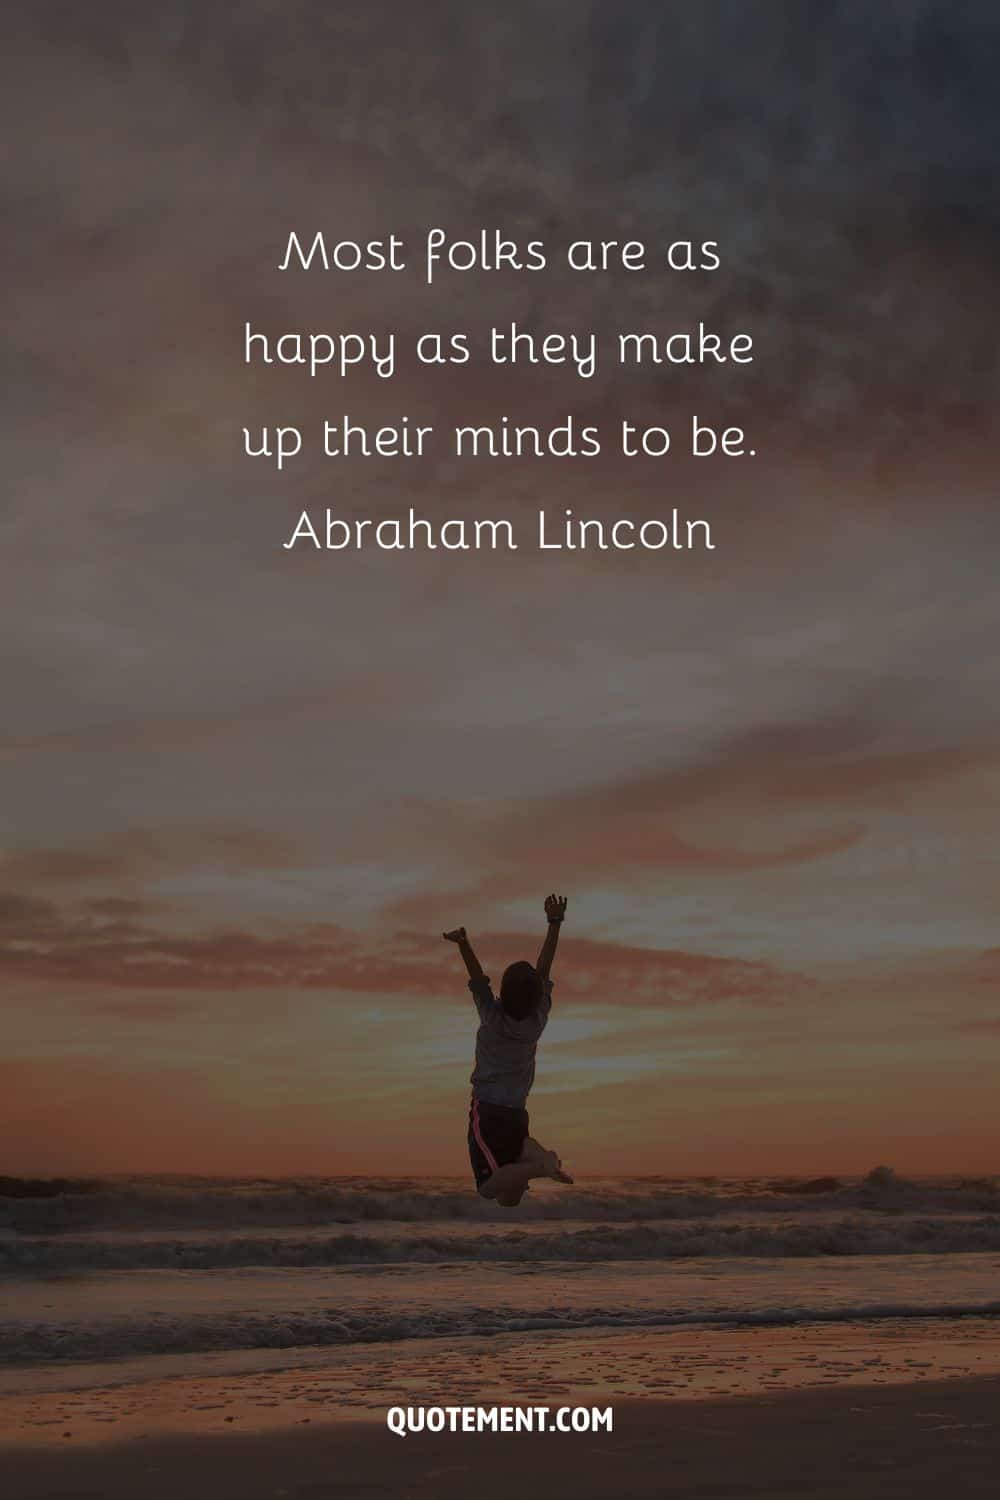 Most folks are as happy as they make up their minds to be. – Abraham Lincoln.